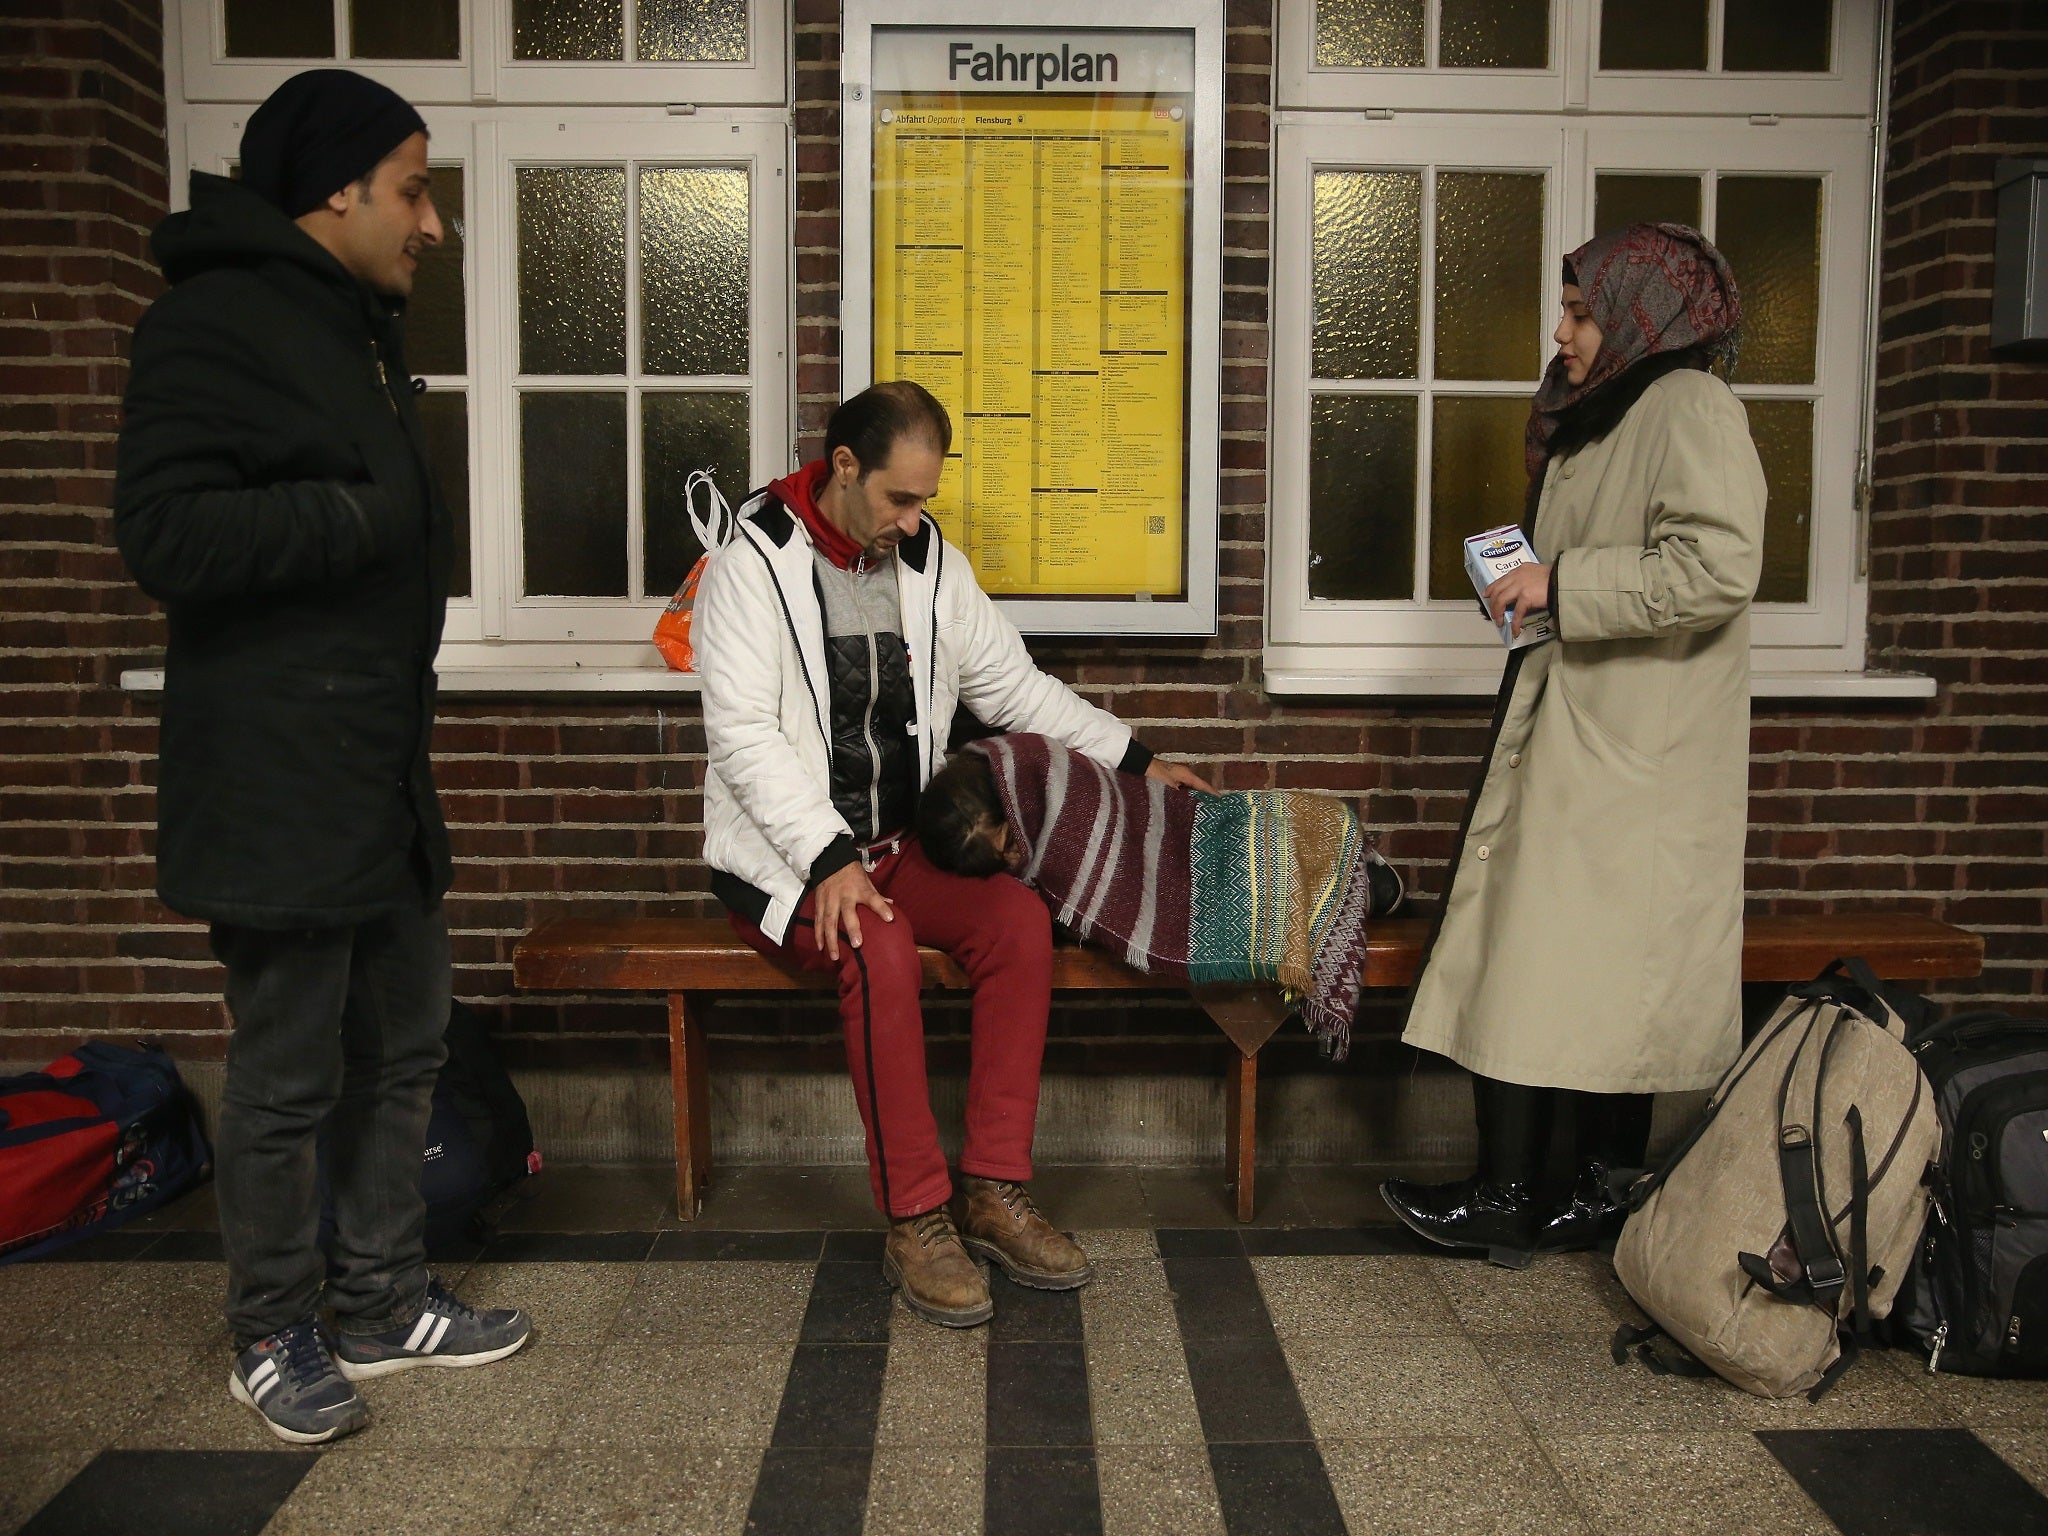 Syrian refugees pictured at the Denmark border town of Flensburg Getty